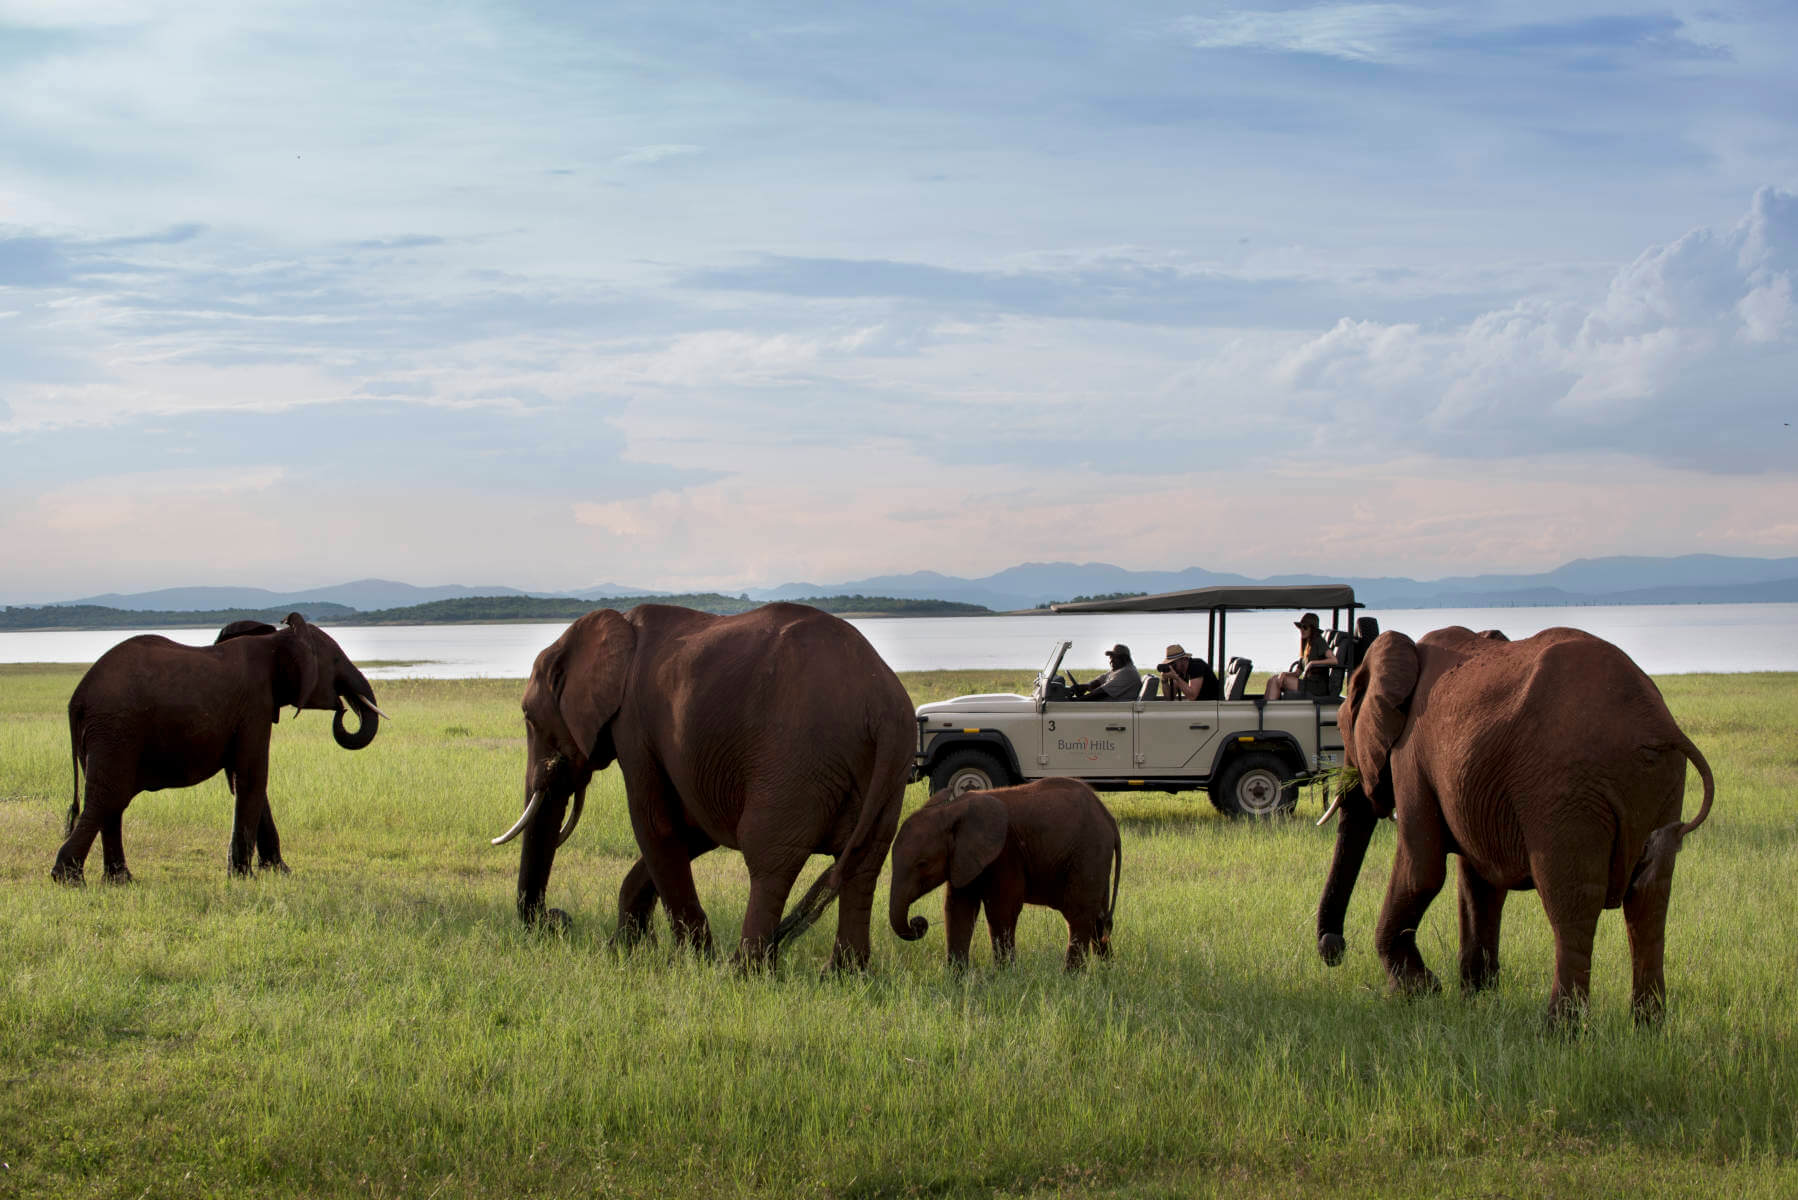 Luxury Safari Magazine welcomes Go2Africa and their wide range of adventures